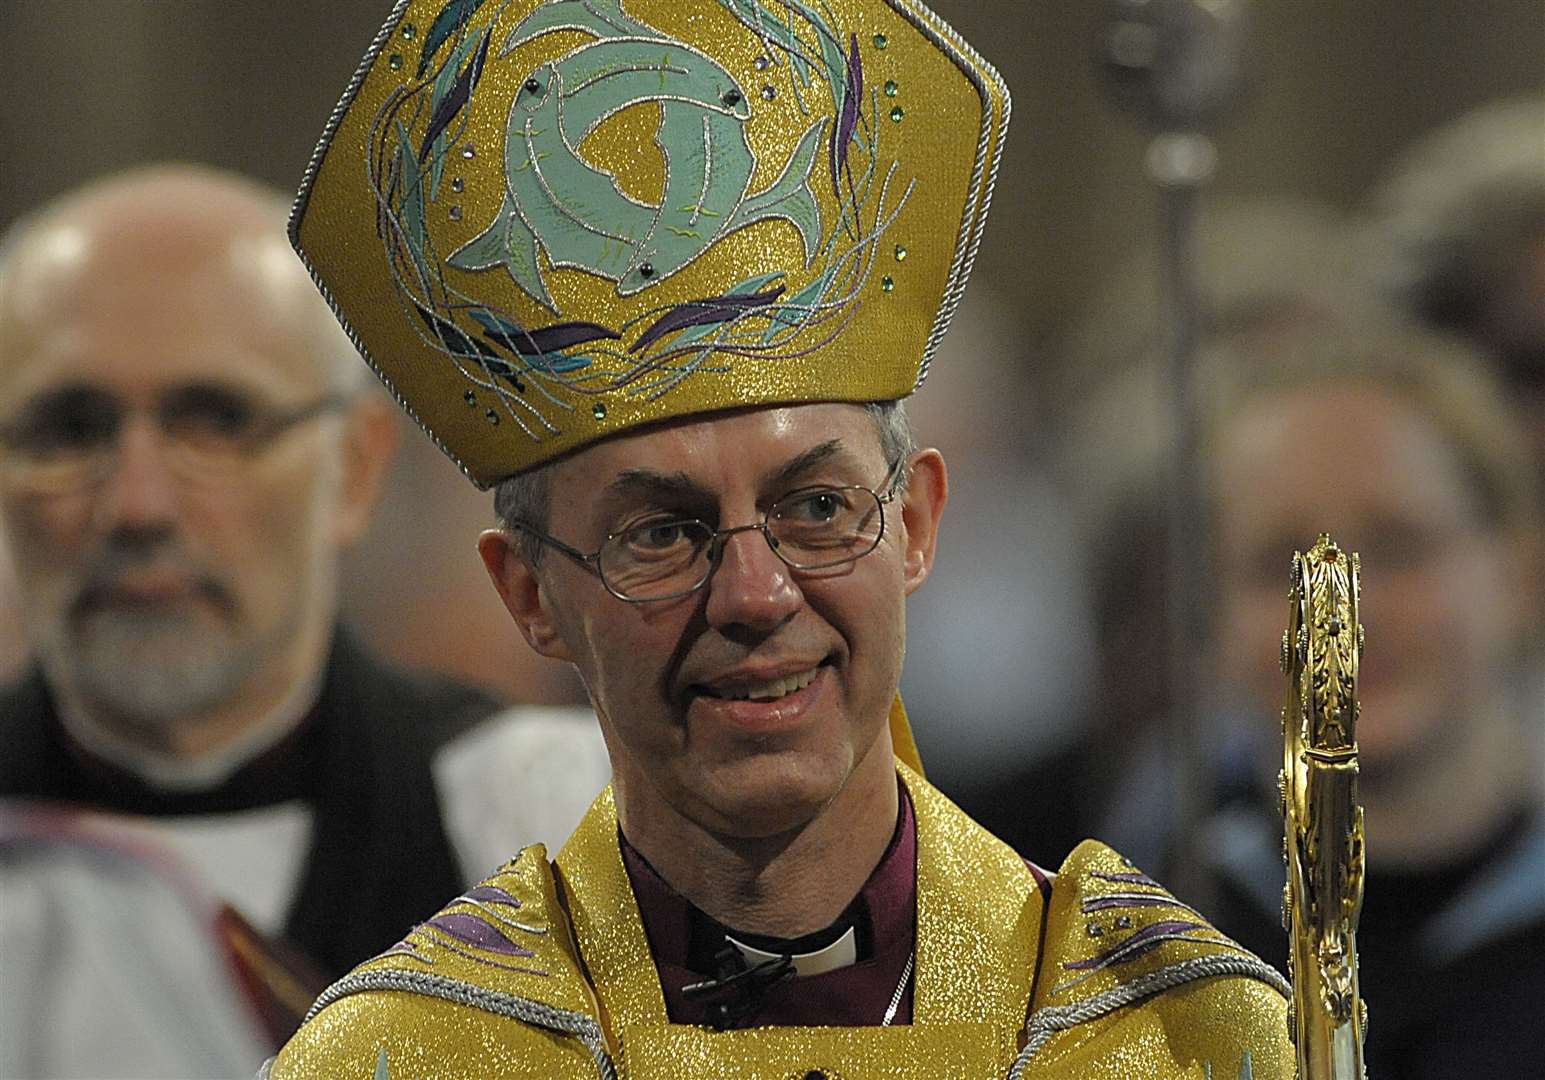 The Archbishop of Canterbury, Justin Welby has sent a message of support to the Princess